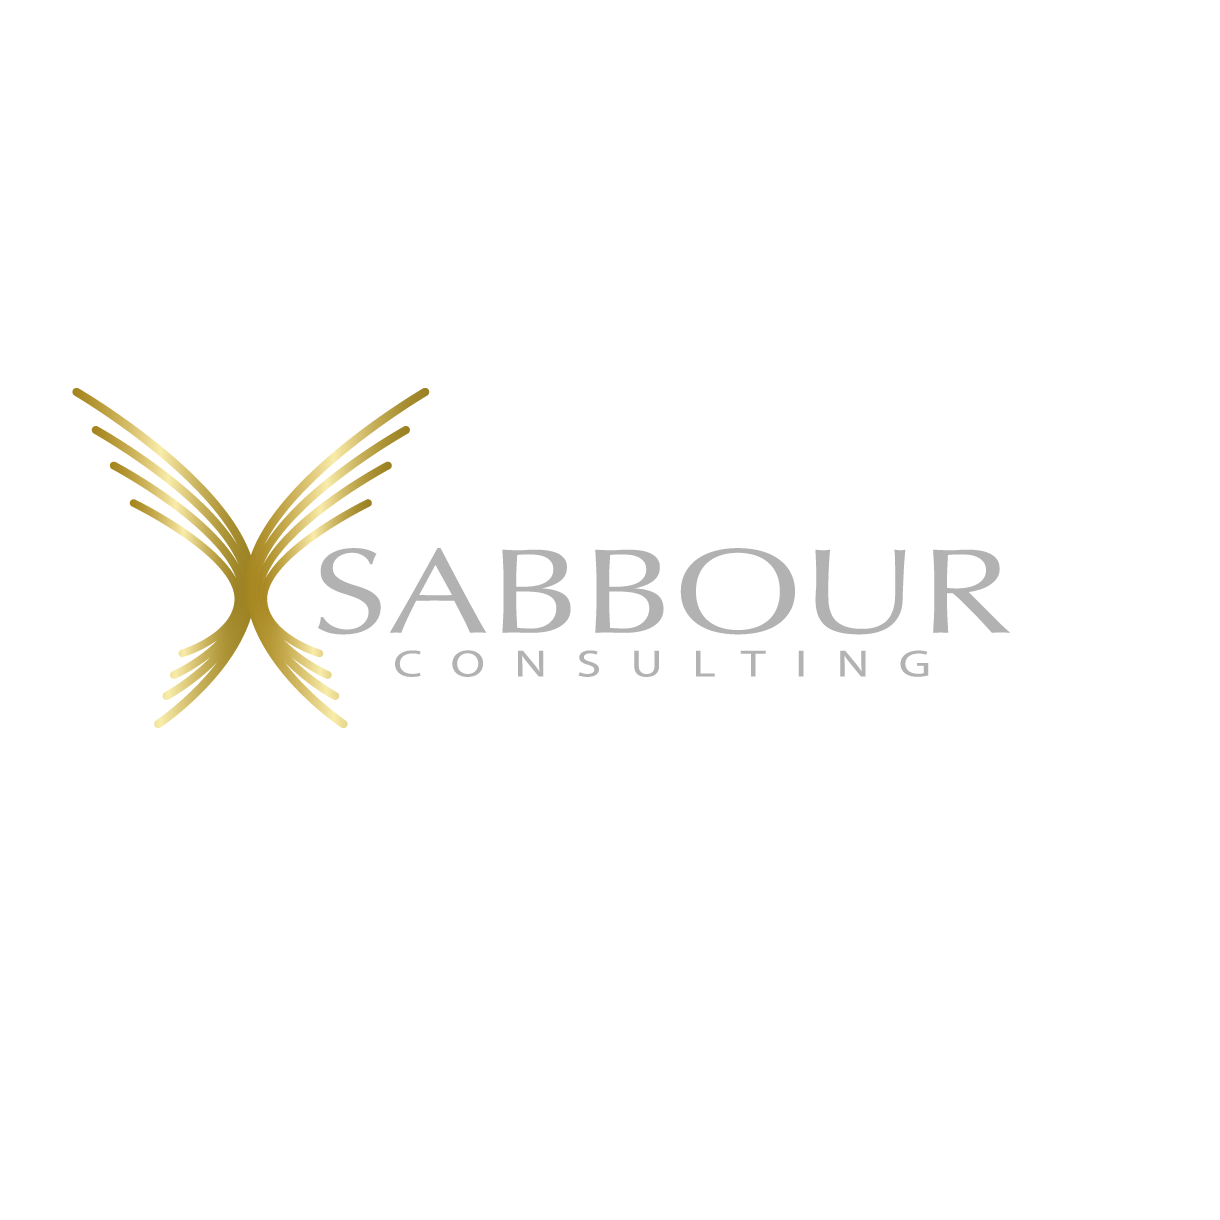 Sabbour Consulting.